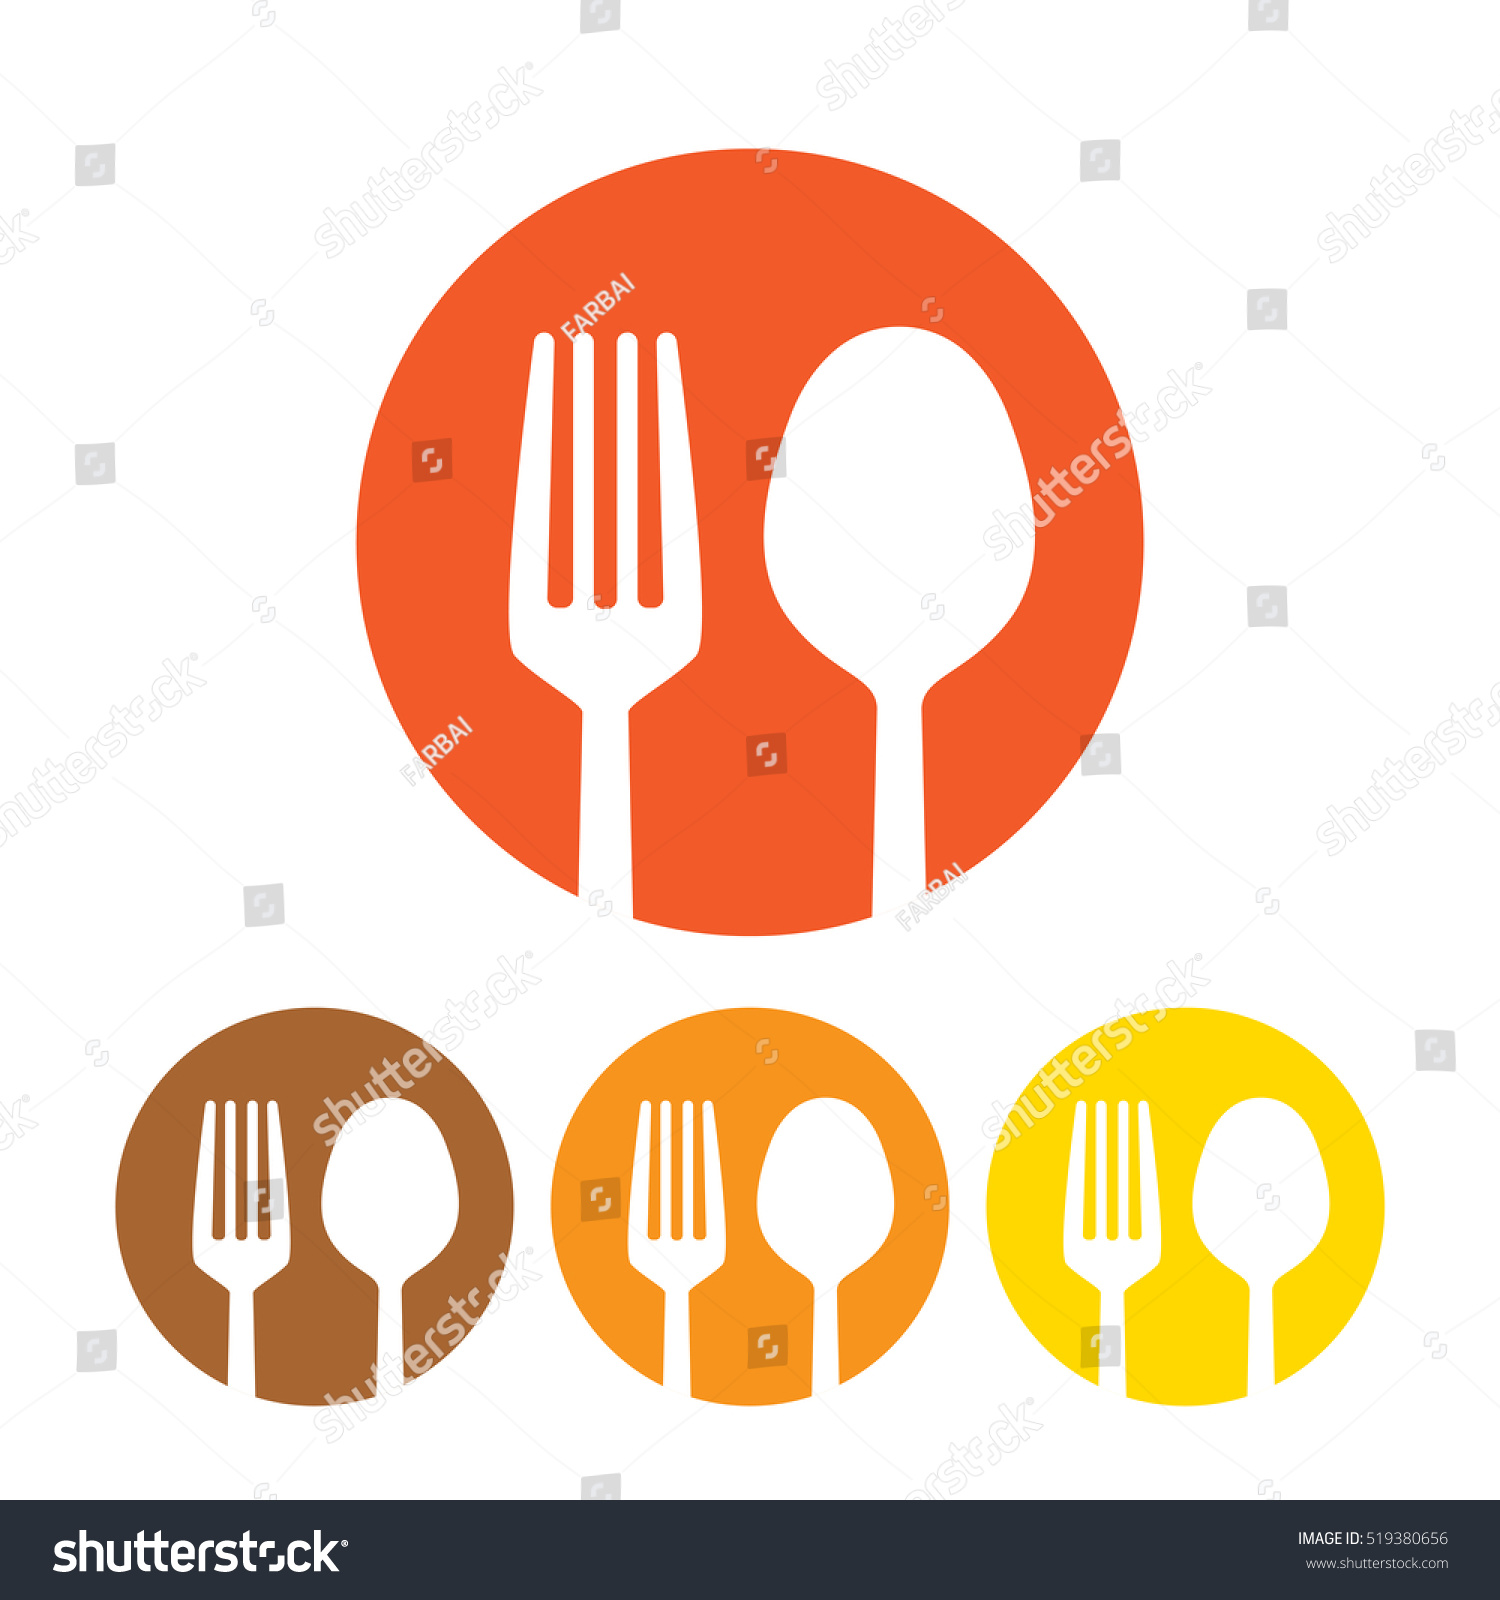 Fork And Spoon Icon Stock Vector 519380656 : Shutterstock